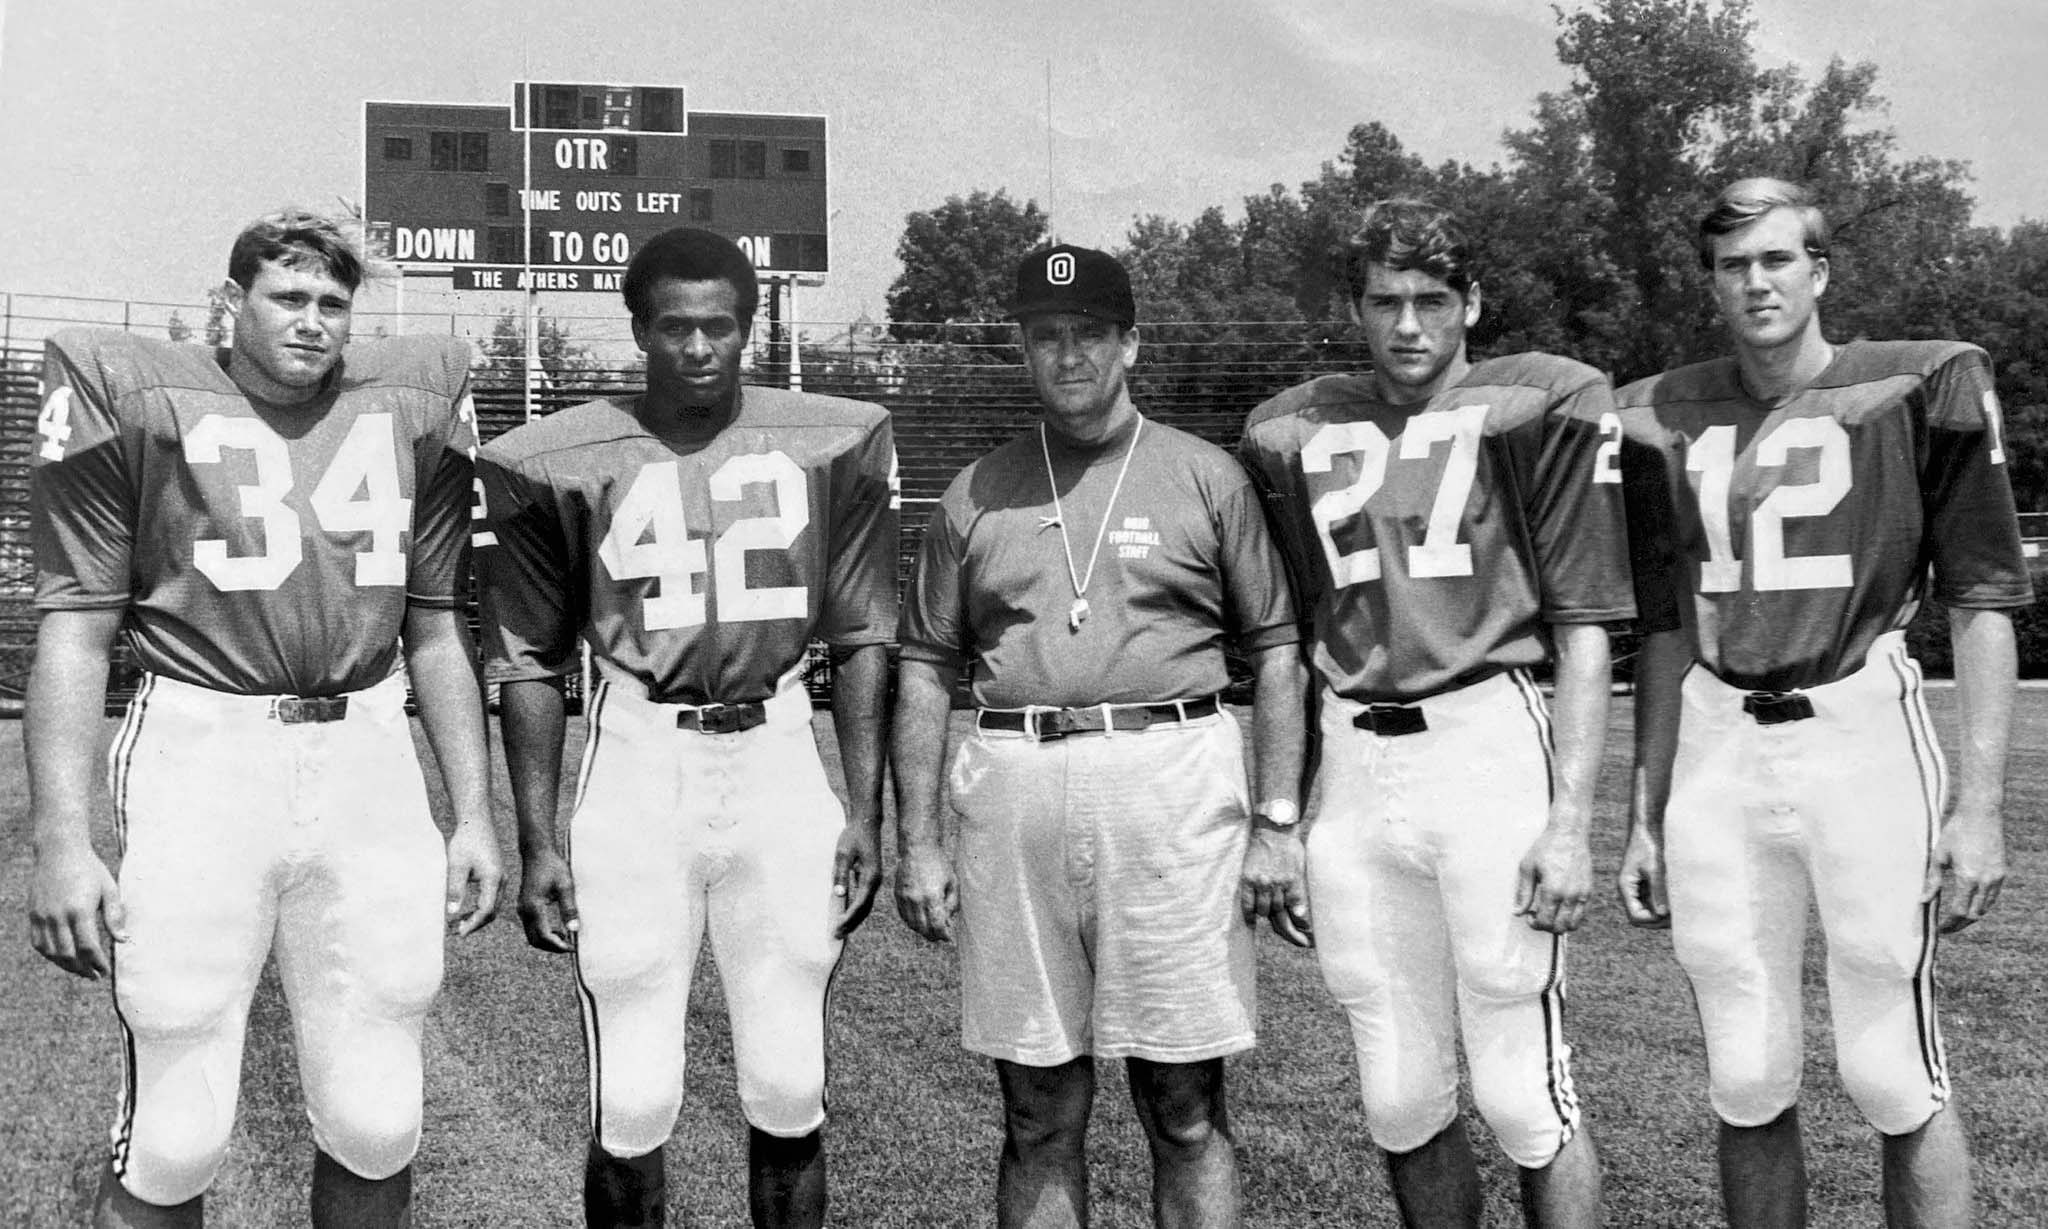 Rick Hawkins (No. 27) was a defensive back for OHIO Football from 1968 to 1972, learning lessons on the field he later applied to his career.